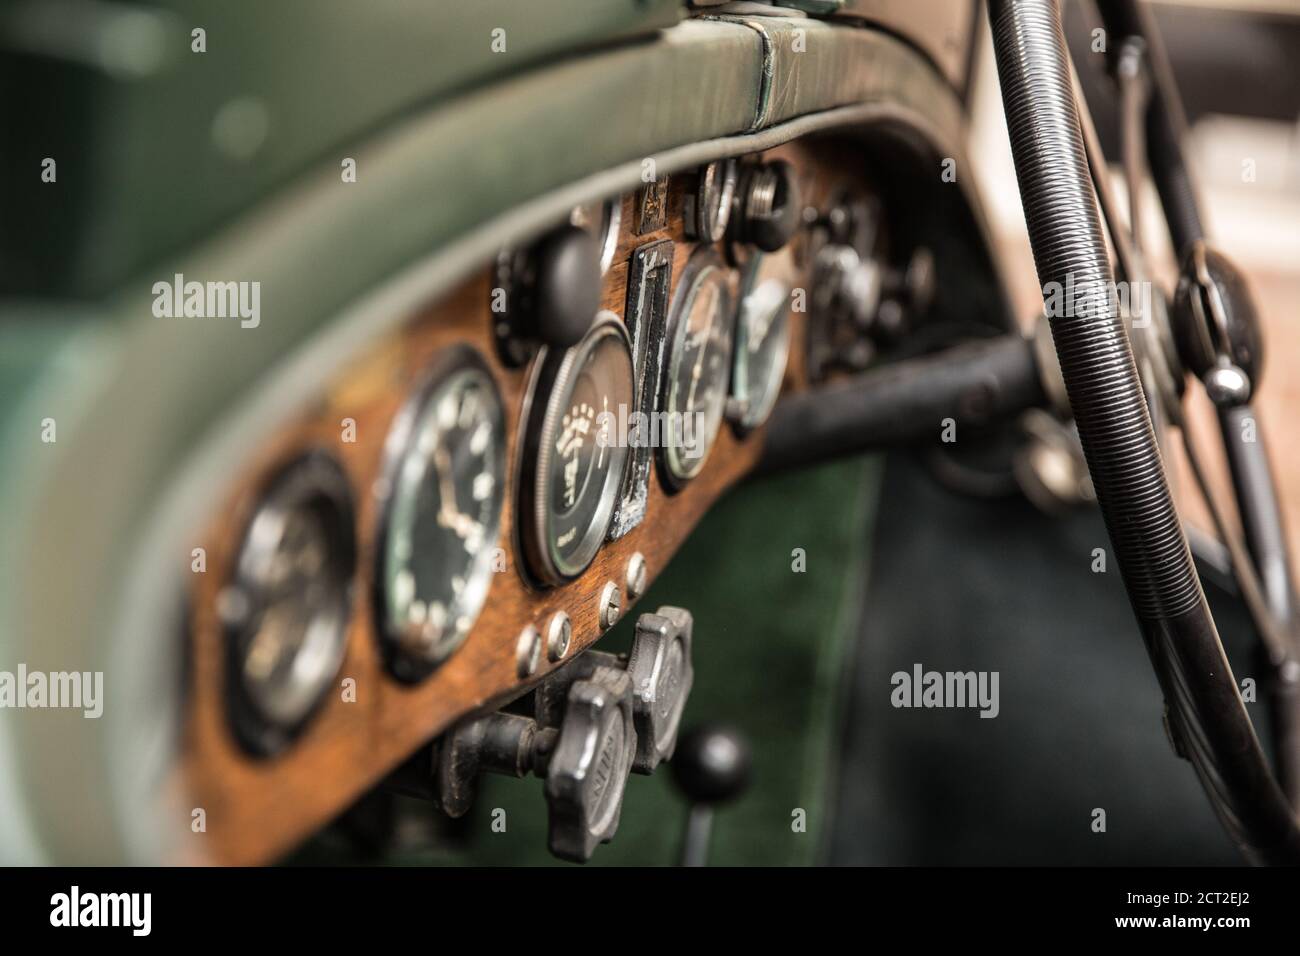 The dash board and steering wheel of a 1931 Bentley 4 1/2 Litre supercharged Boat tail Vintage car at the Bicester Heritage Sunday Scramble. Stock Photo